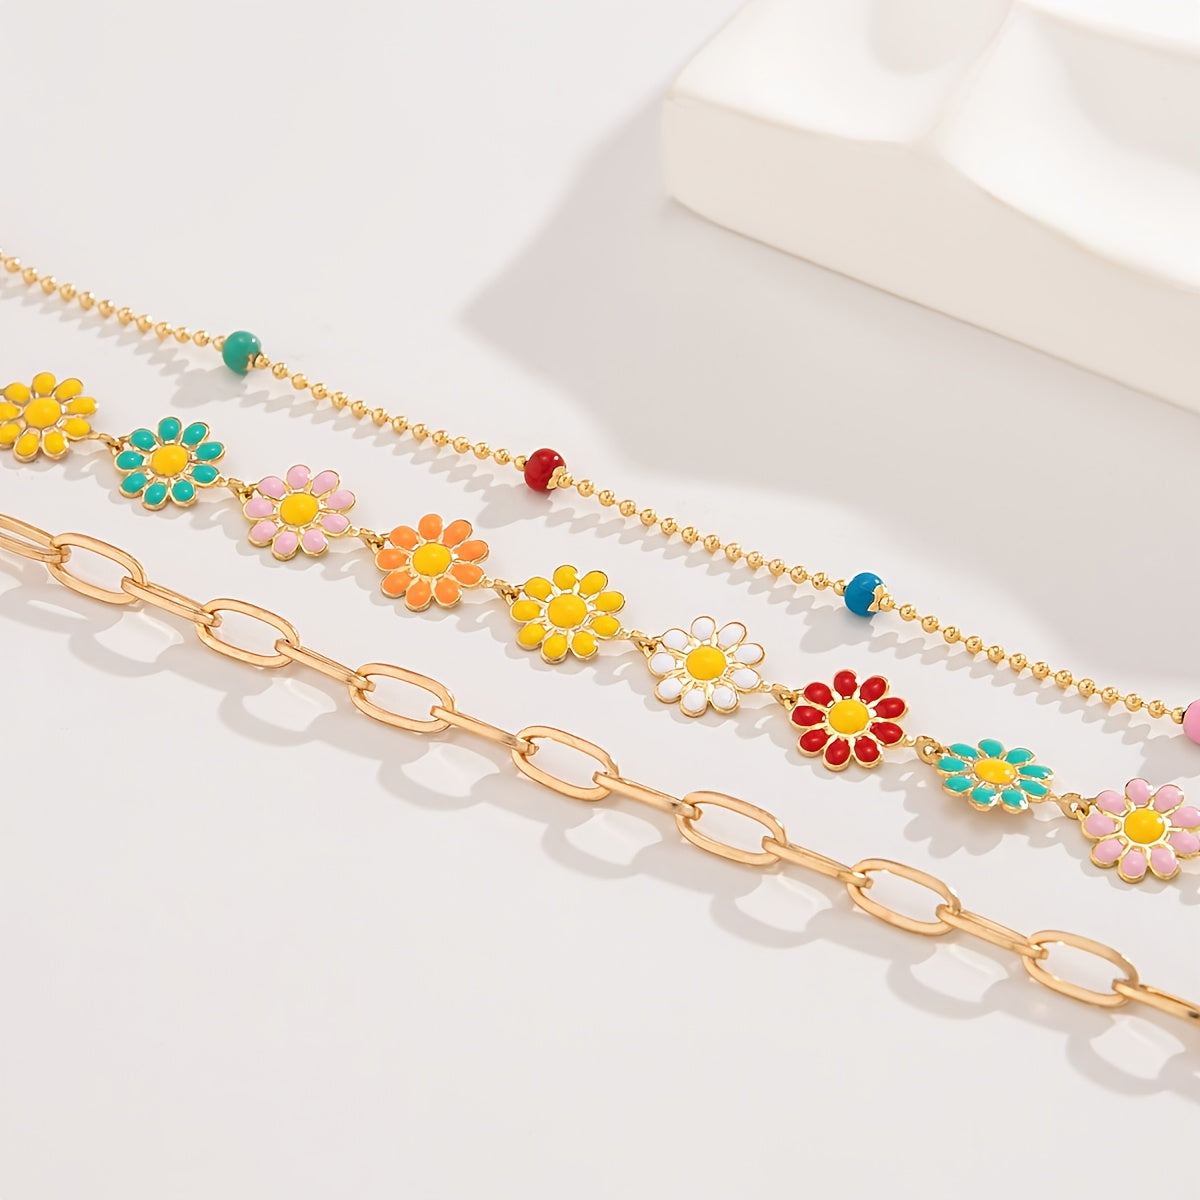 Colorful Sunflower Flower Decor Chain Necklace Set - Add Personality to Your Look!